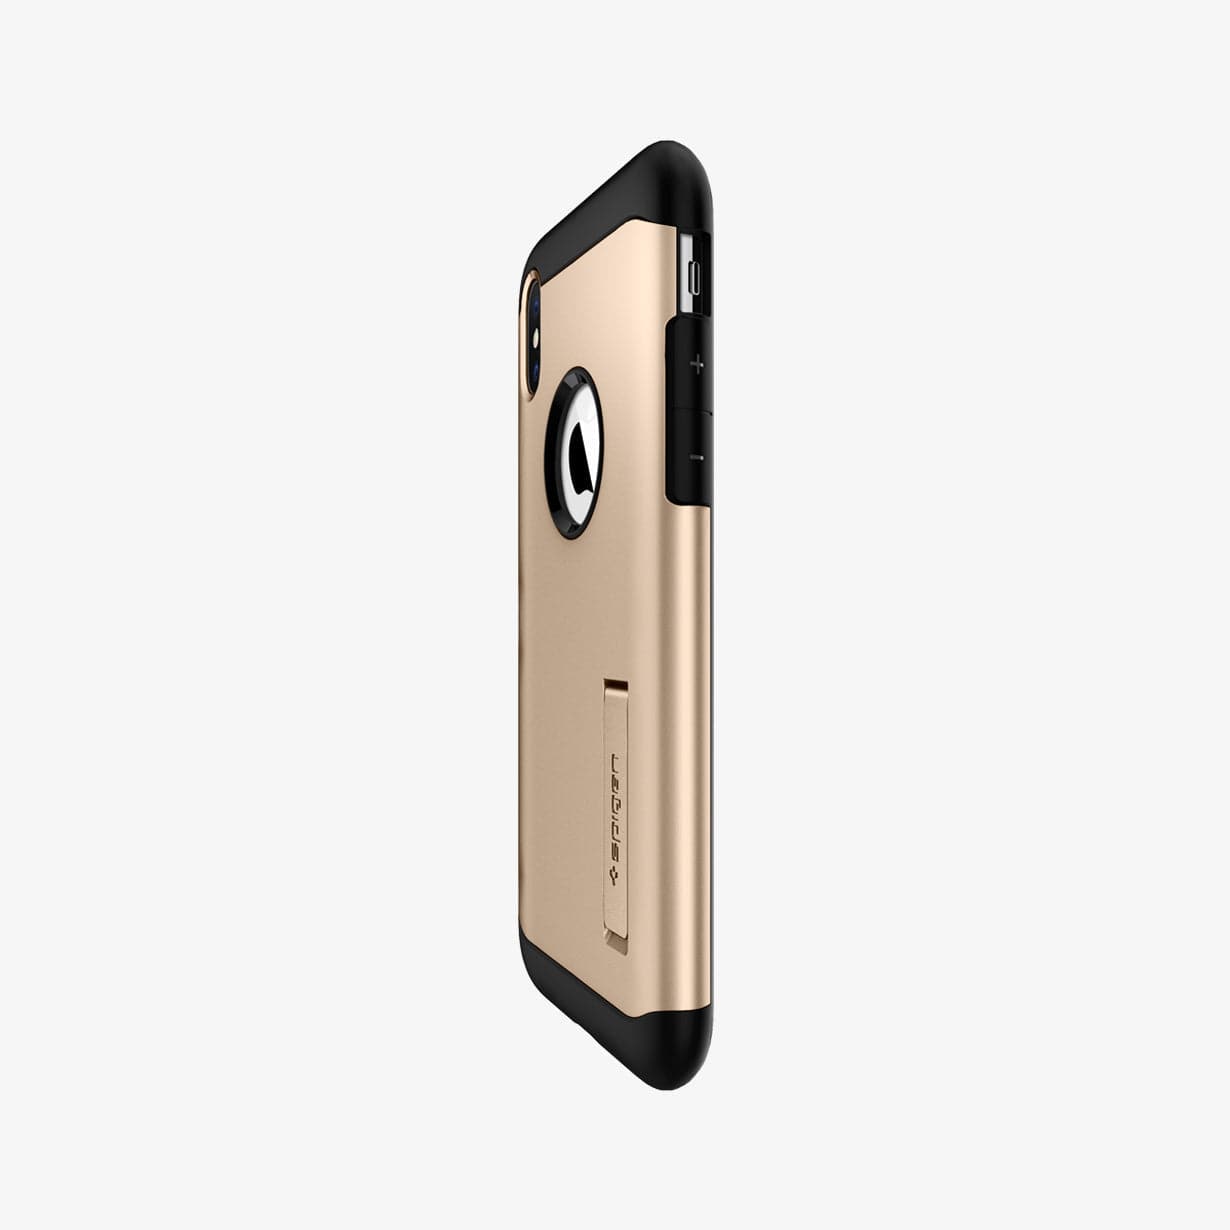 063CS24516 - iPhone XS Case Slim Armor in champagne gold showing the side and partial back